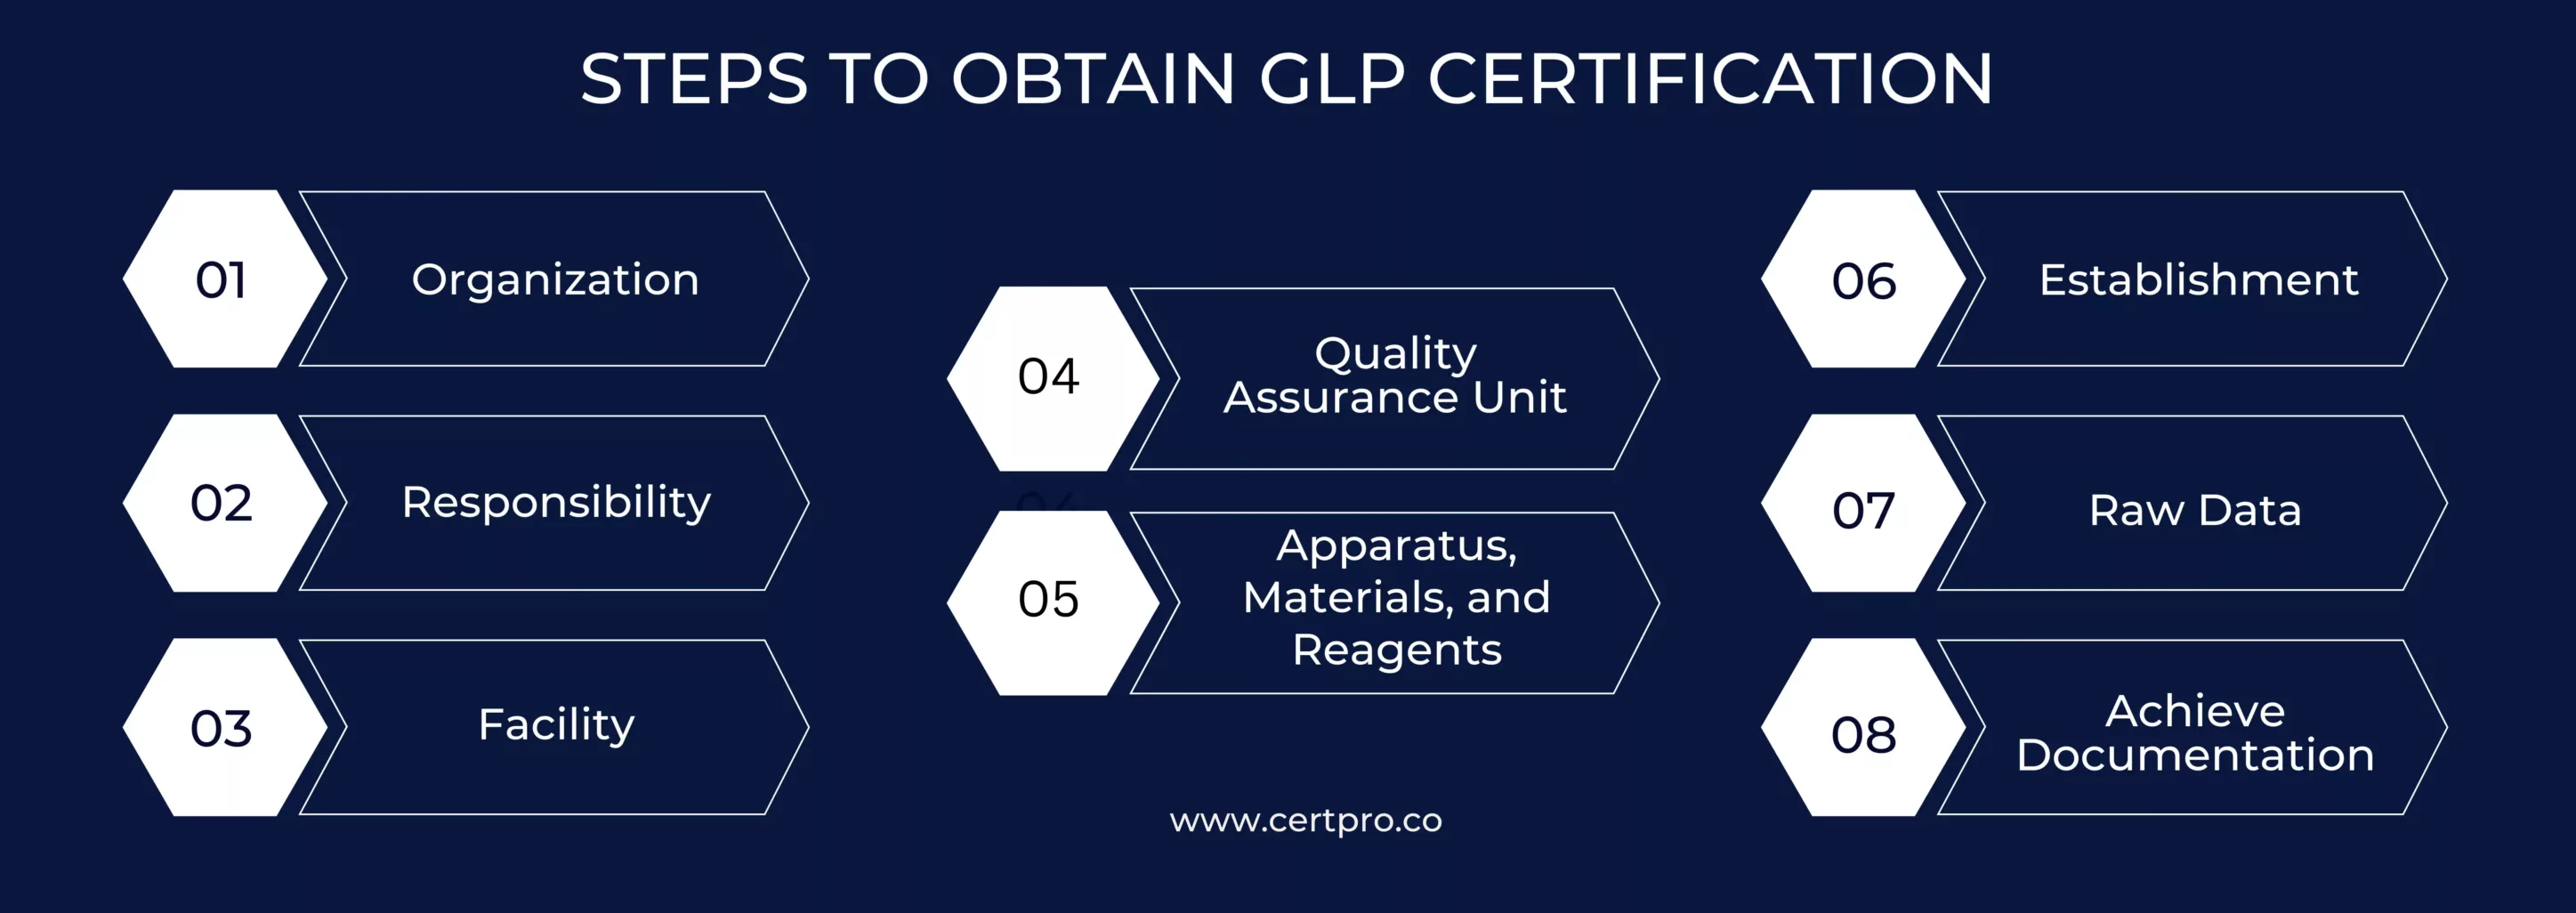 STEPS TO OBTAIN GLP CERTIFICATION